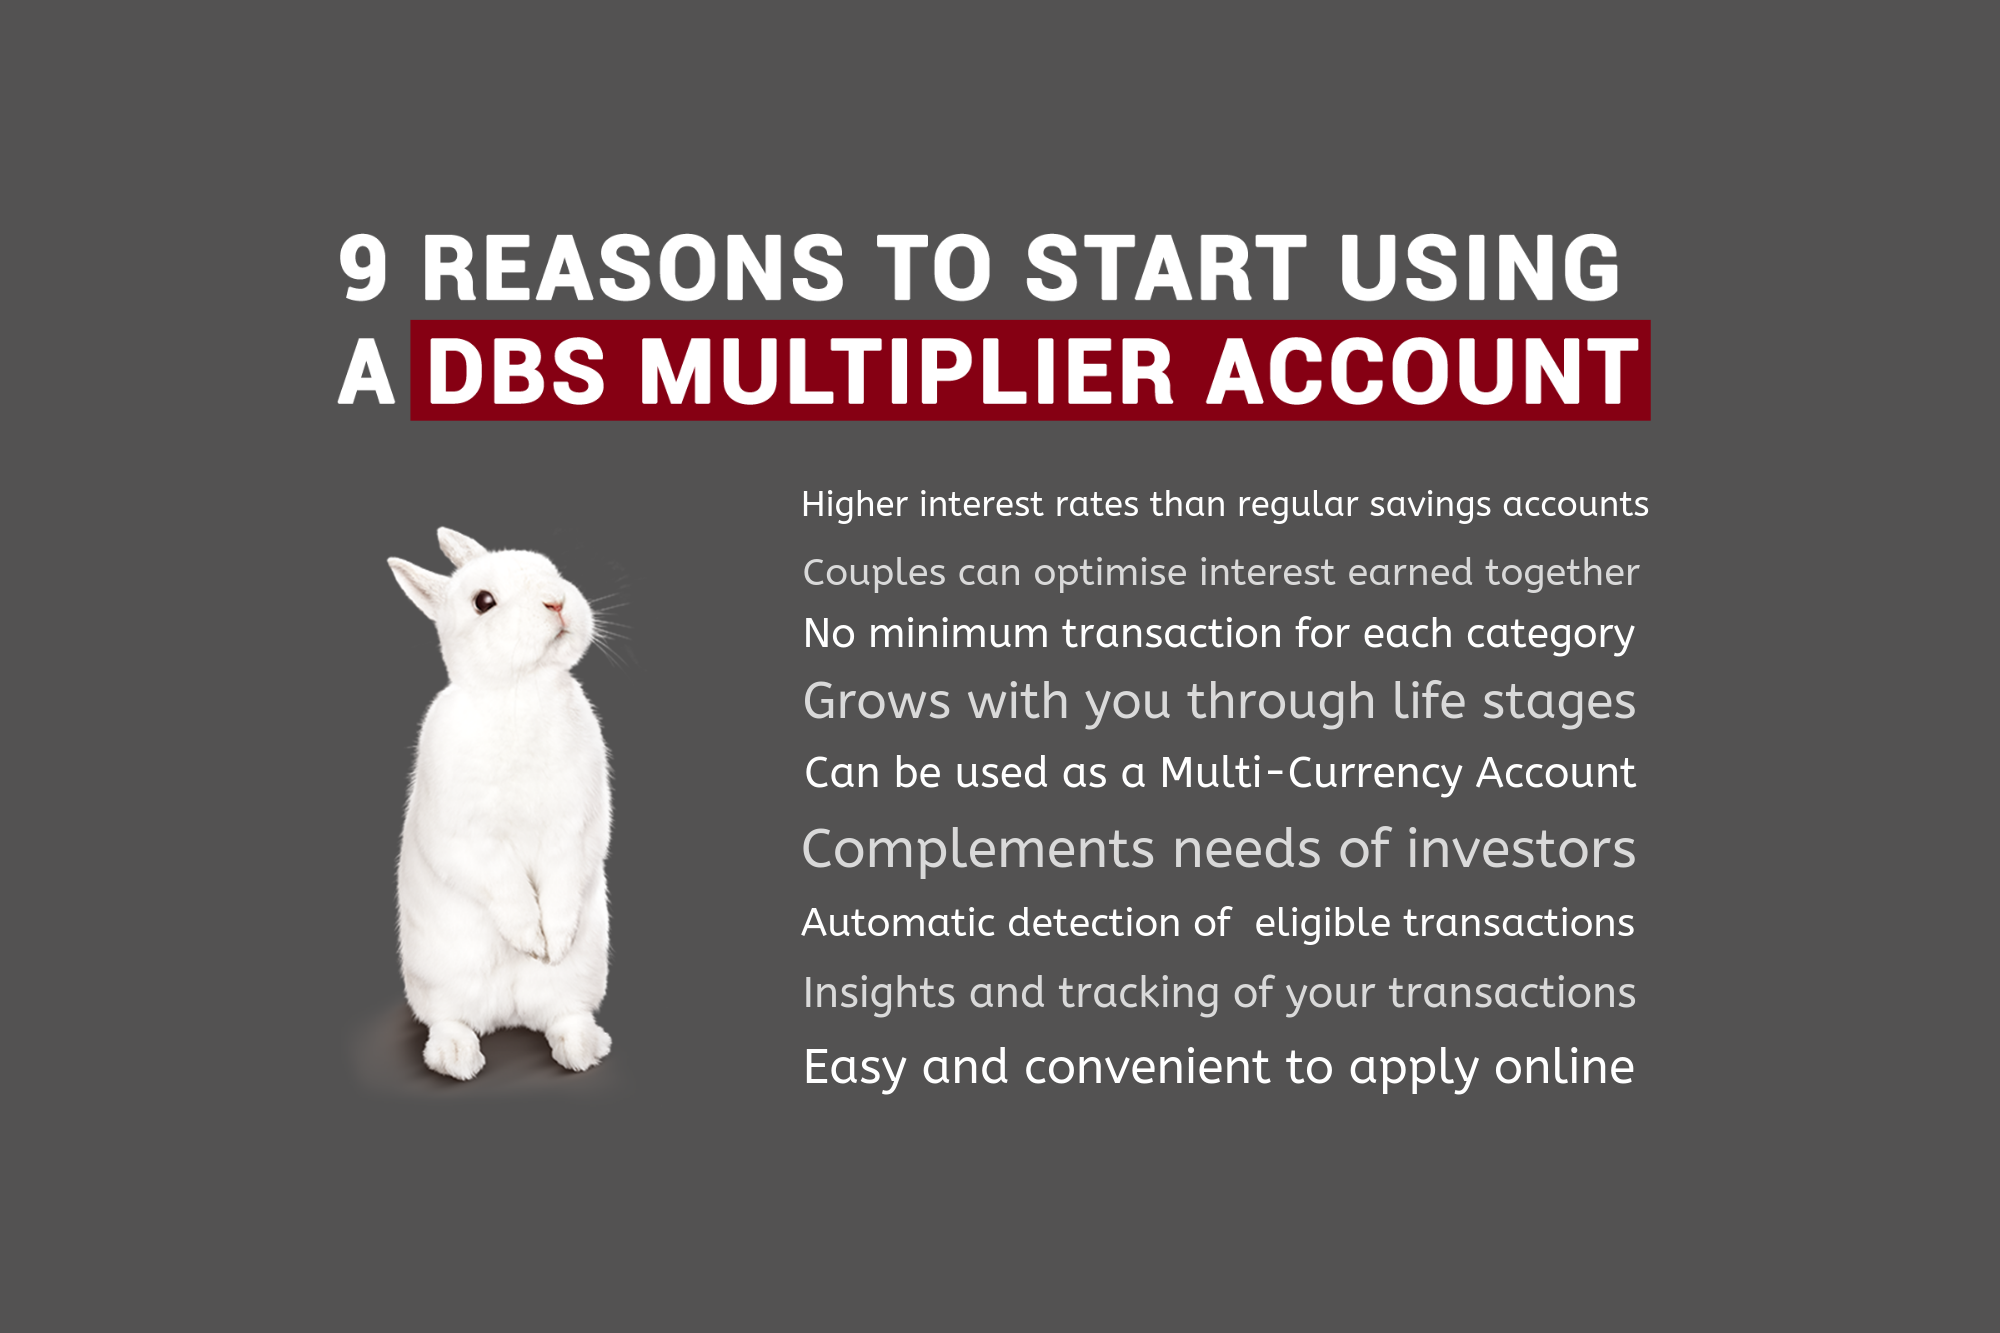 9 Excellent Reasons Singaporeans Should Start Using A DBS Multiplier Account Today